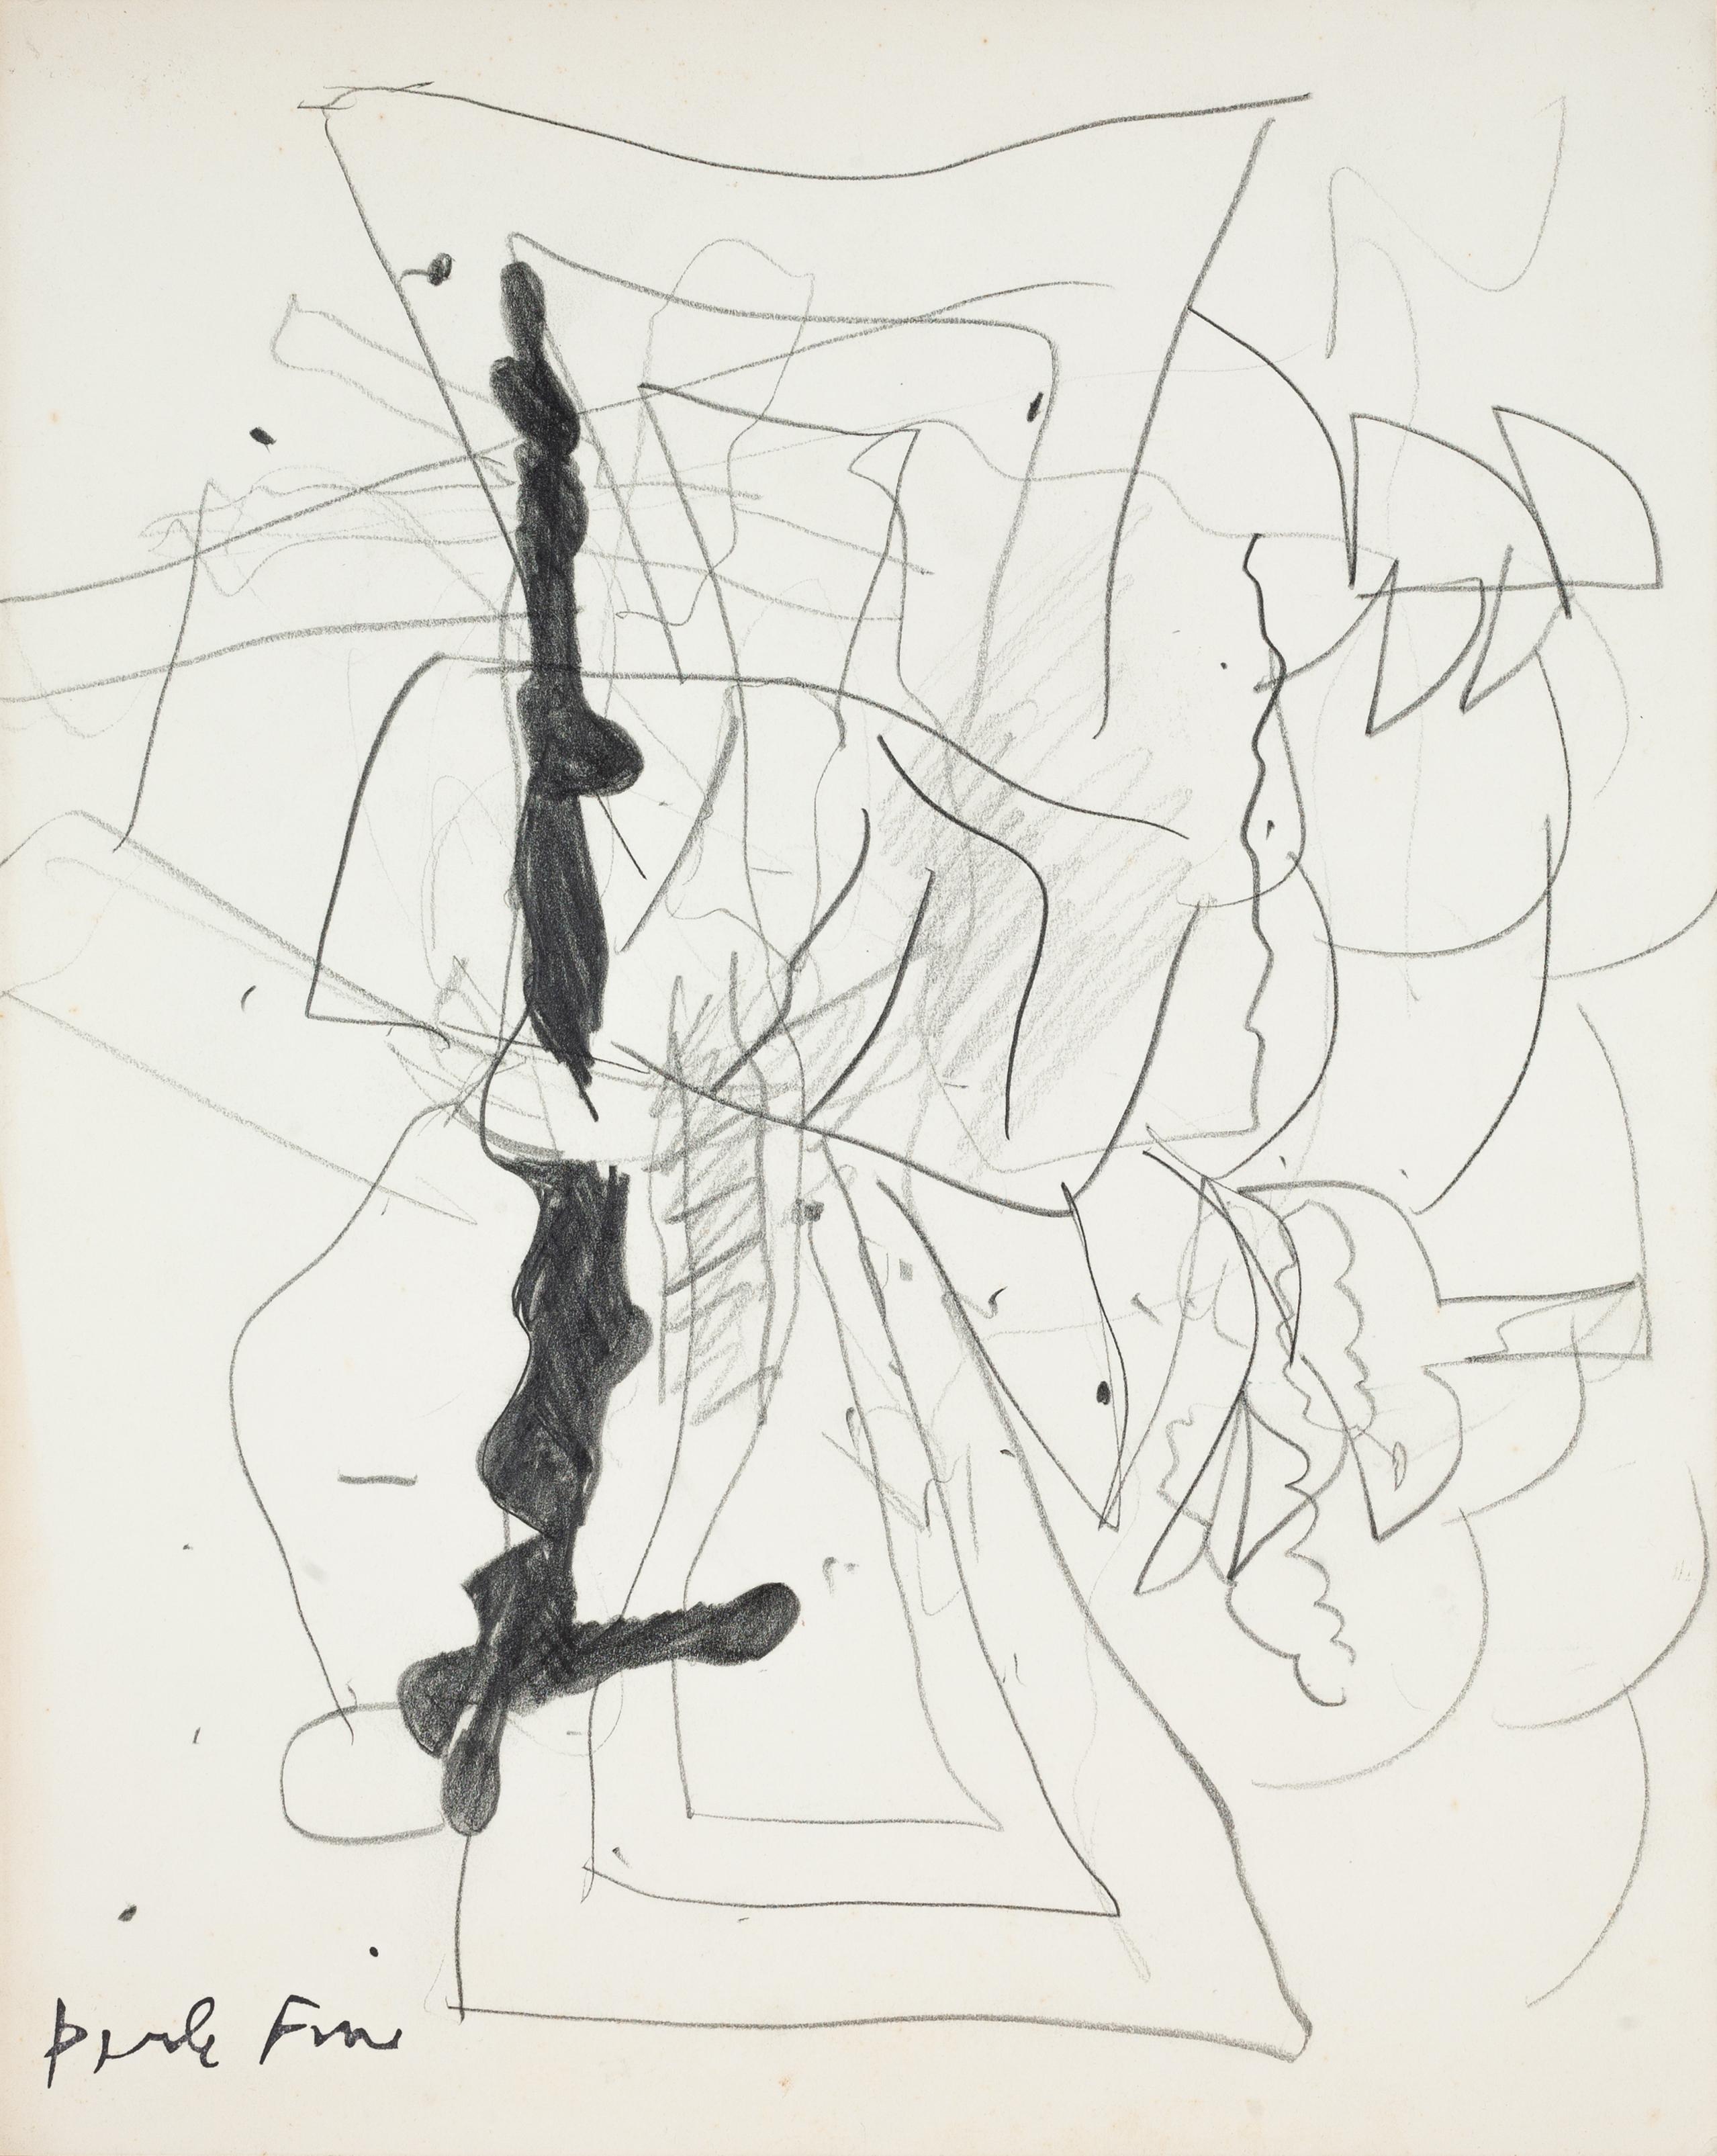 Perle Fine Abstract Drawing - Untitled